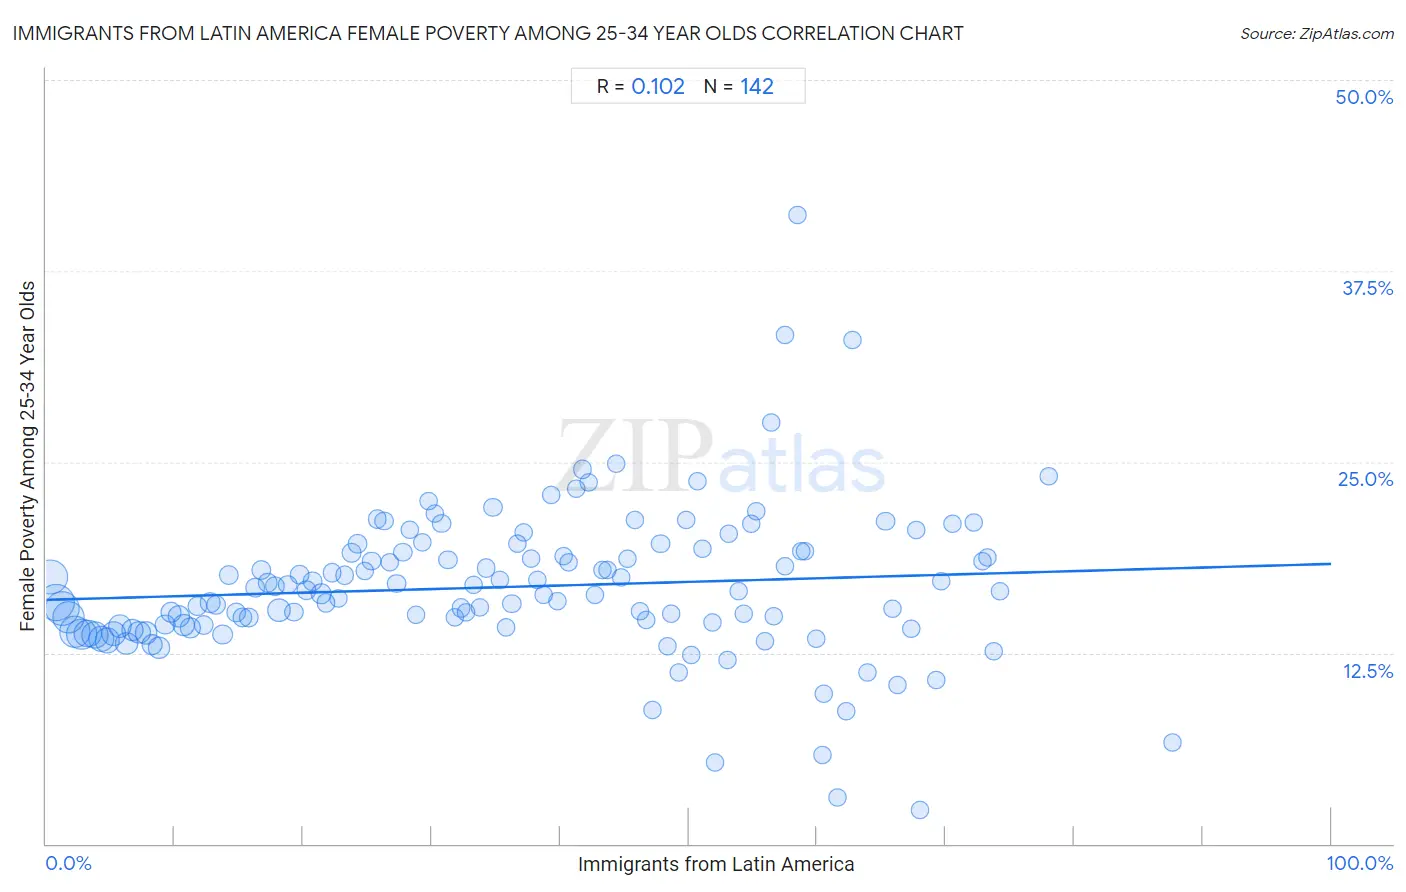 Immigrants from Latin America Female Poverty Among 25-34 Year Olds